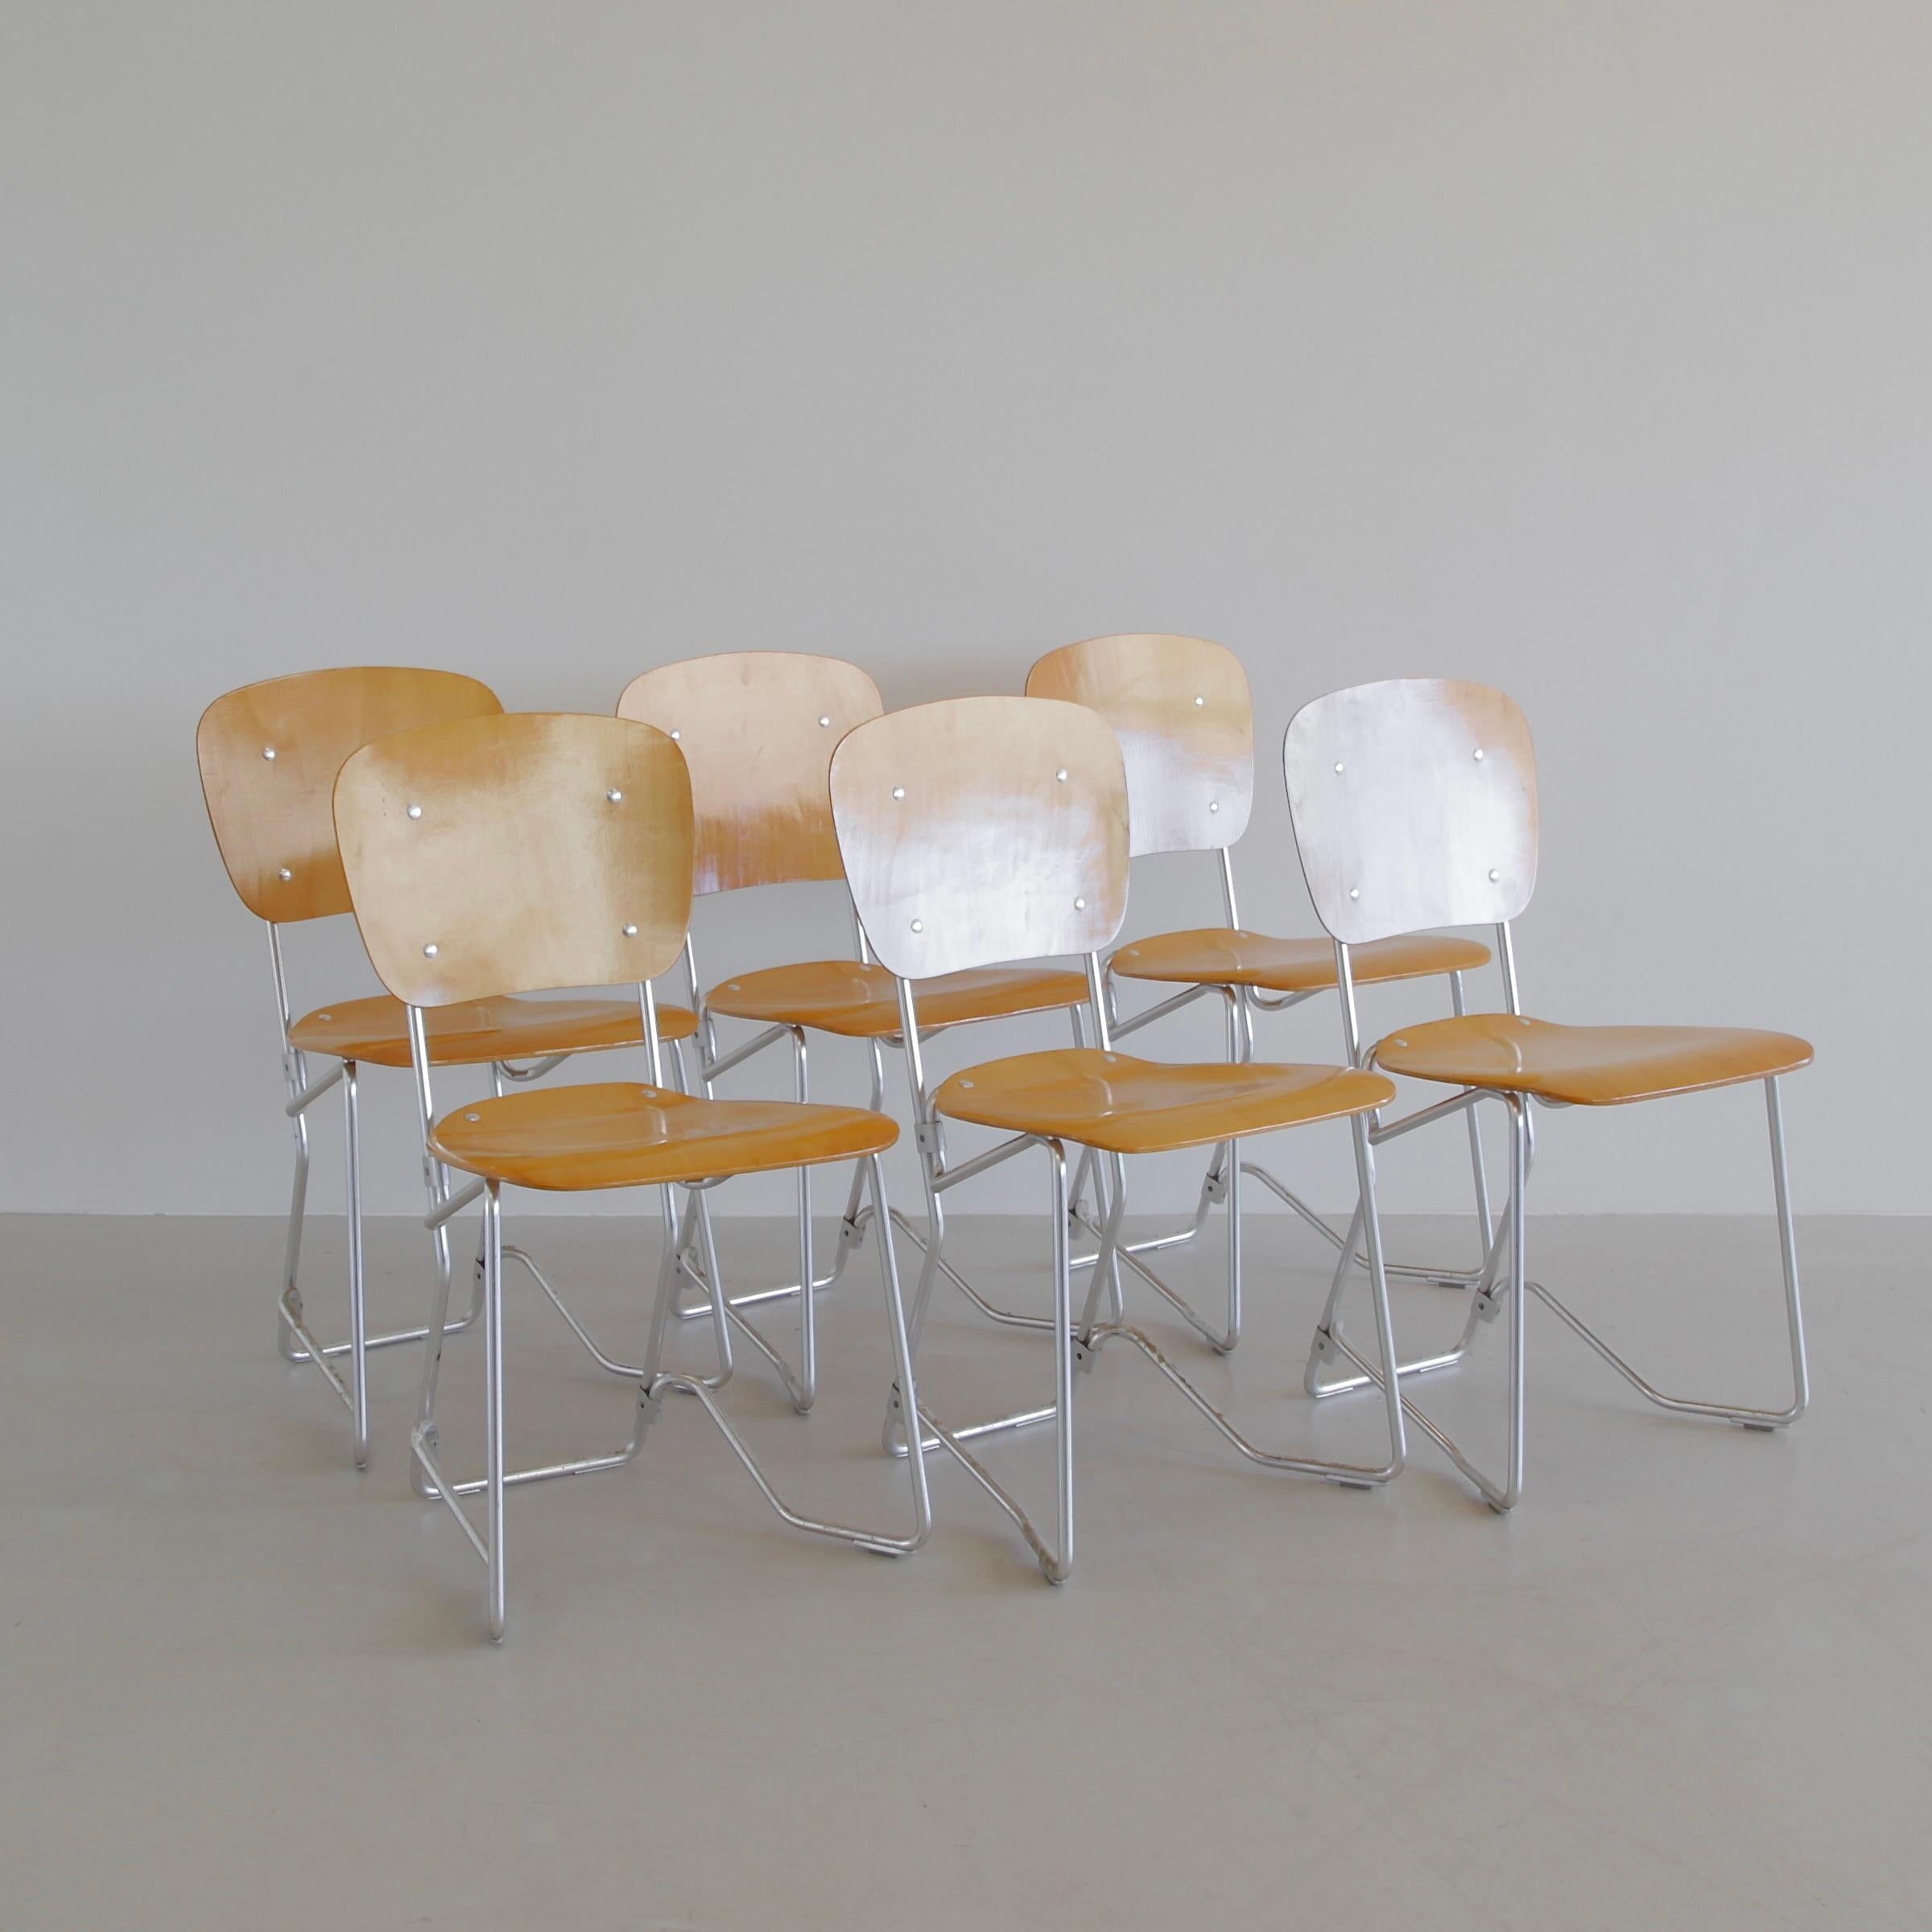 A beautiful set of six (6) stackable bentwood chairs, designed by Armin Wirth in the 1950s. Light aluminium frame with birch seat and backrest. Stacked together, they look like a wonderful sculpture, comfortable to sit on and super